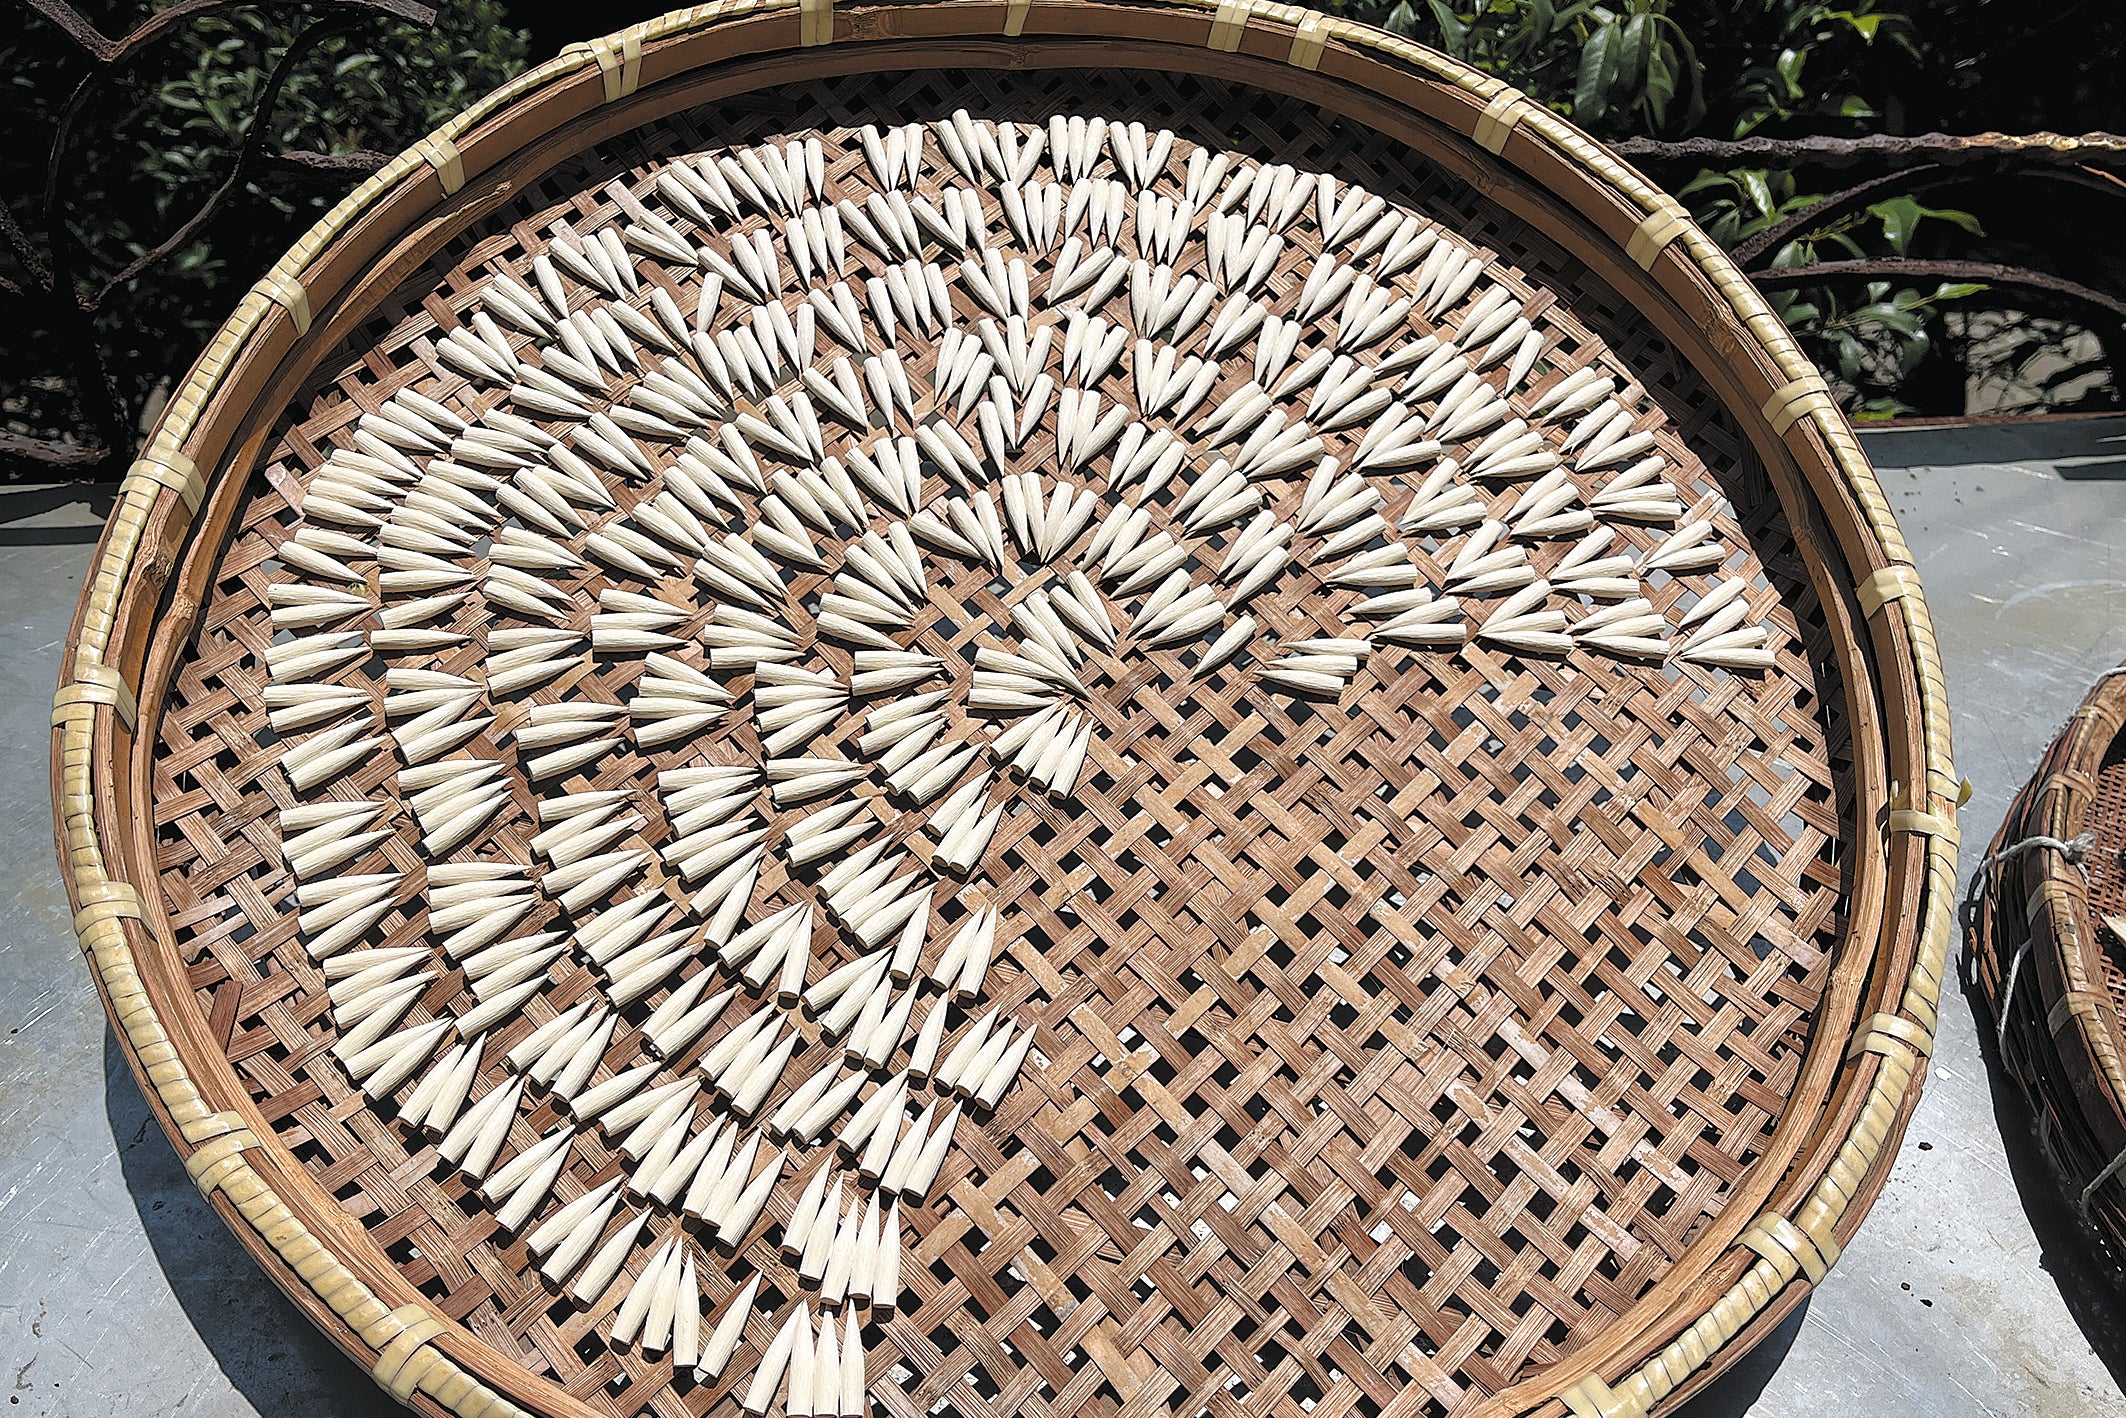 Drying is one of the 128 steps in the crafting process of Huzhou writing brushes